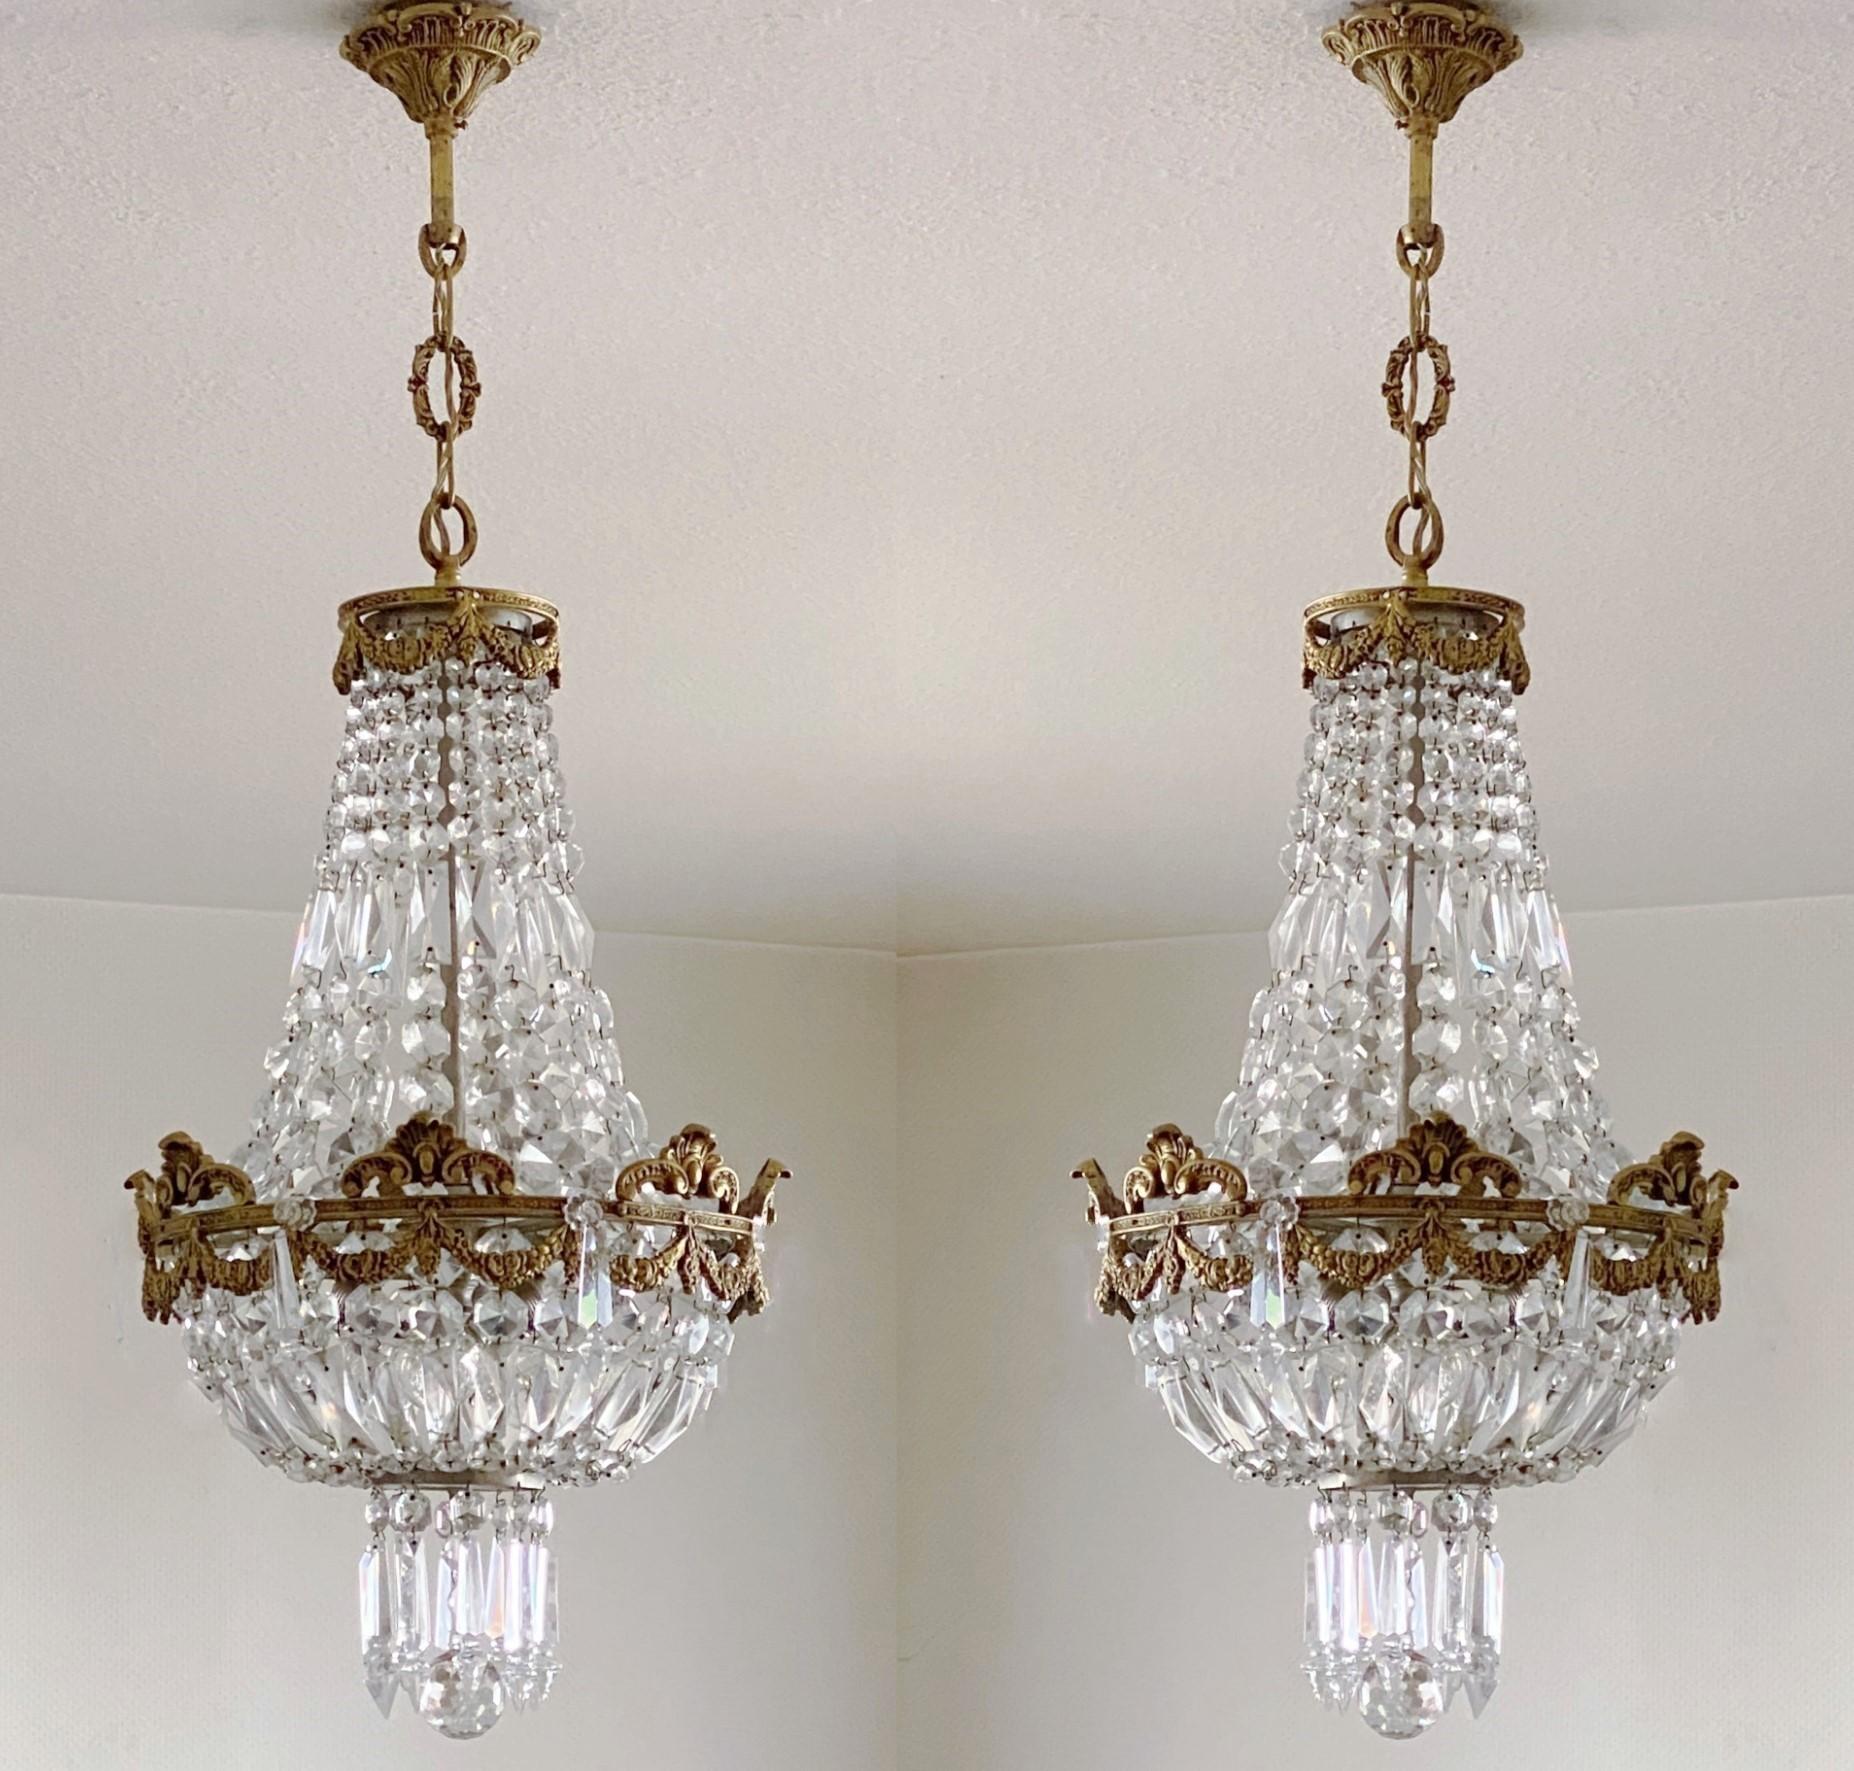 A beautiful pair of Louis XV style faceted crystal and solid gilt bronze basket form chandeliers or lanterns, France 1880-1890. Richly decotate with swags and crystal hangings. In fine antique condition, wonderful aged patina to bronze, professional